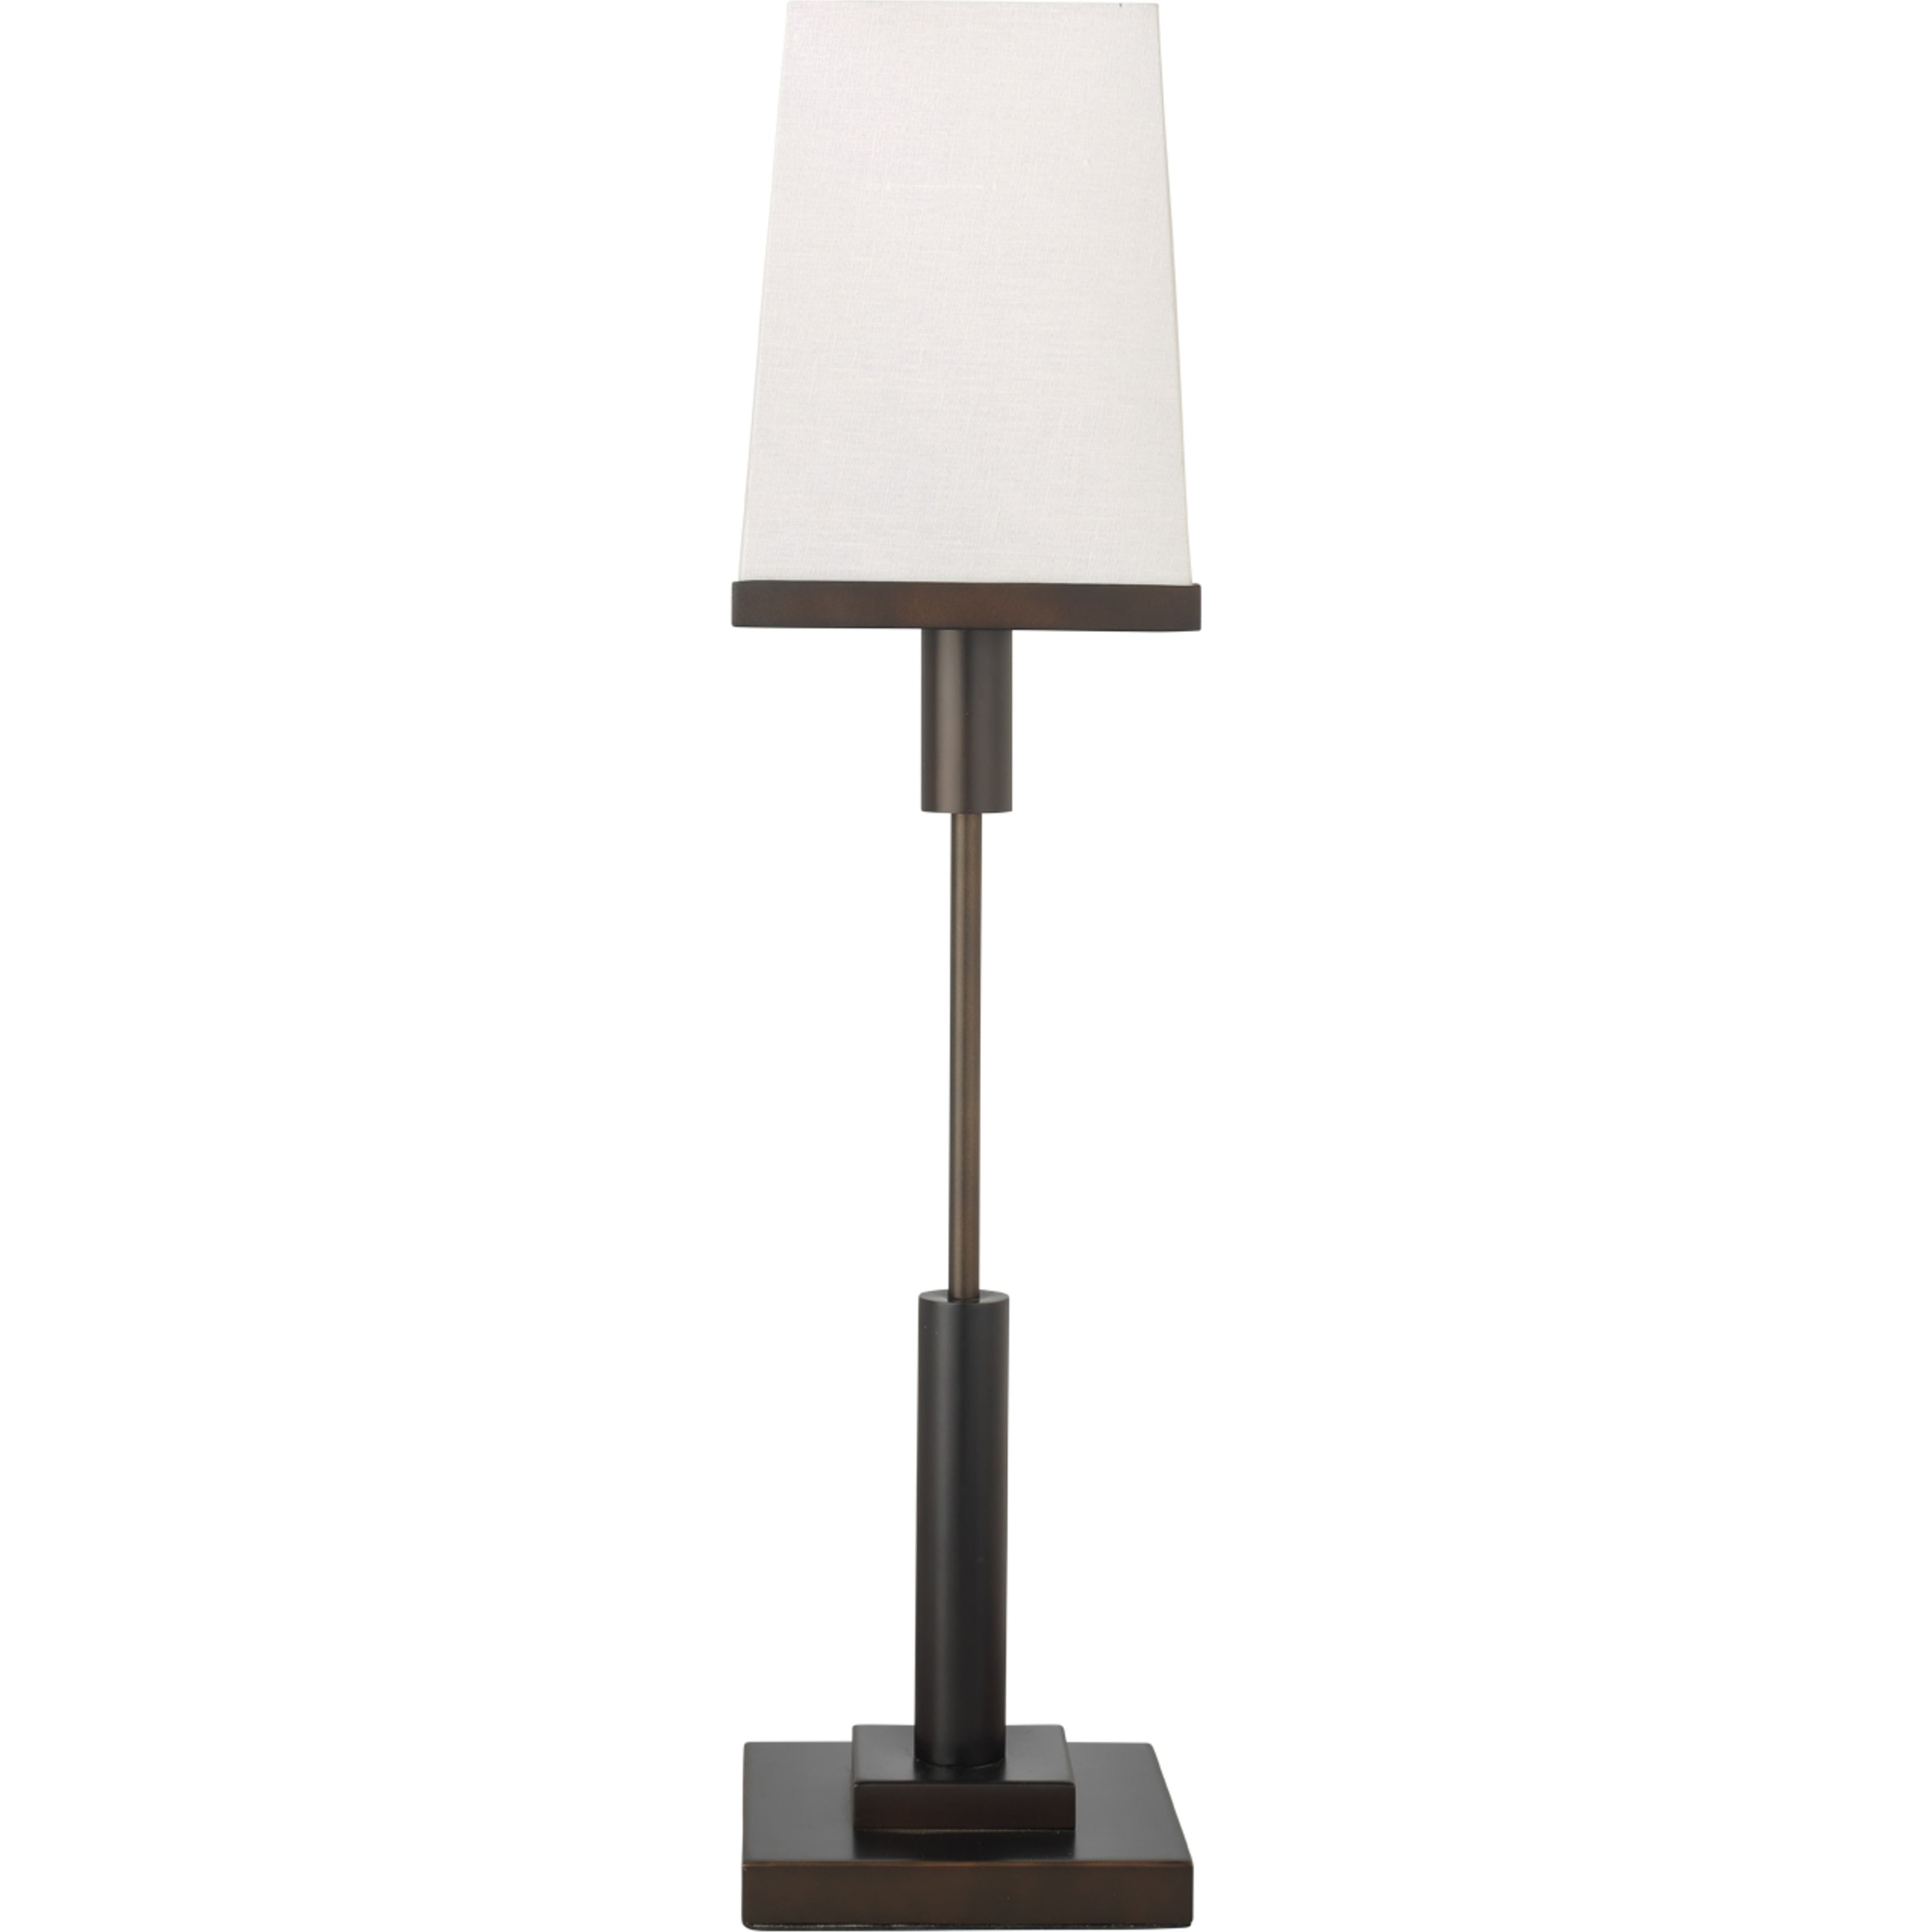 Jamie Young Company - 9JUDOBSQ131S - Jud Table Lamp - Jud - Oil Rubbed Bronze